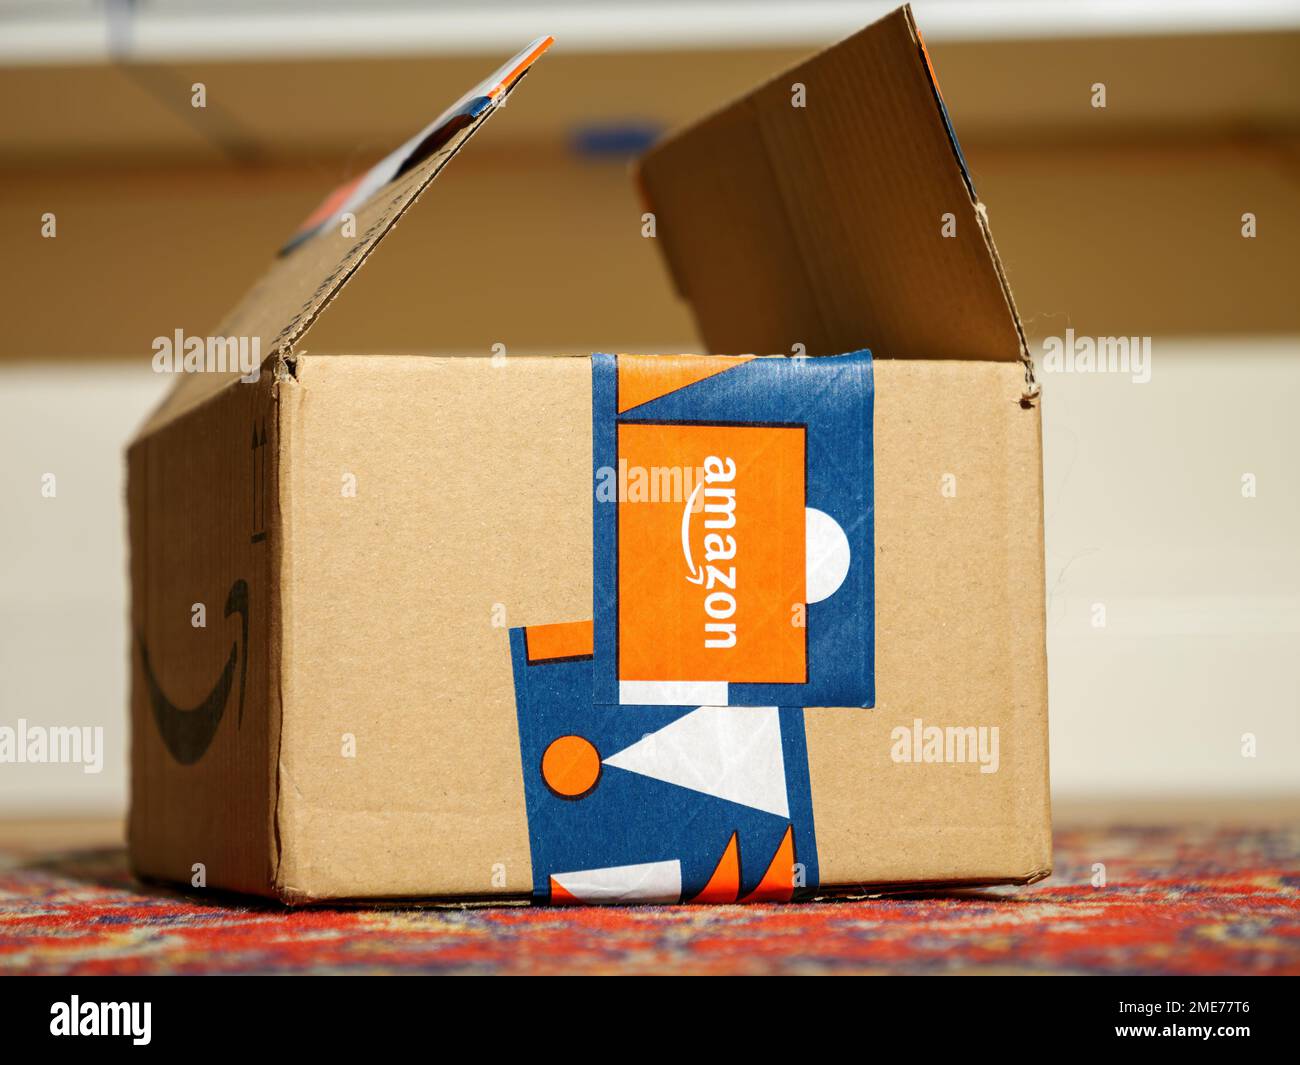 Frankfurt, Germany - Dec 2, 2022: Open Amazon winter holidays gift package parcel cardboard with dedicated scotch protection glue band Stock Photo